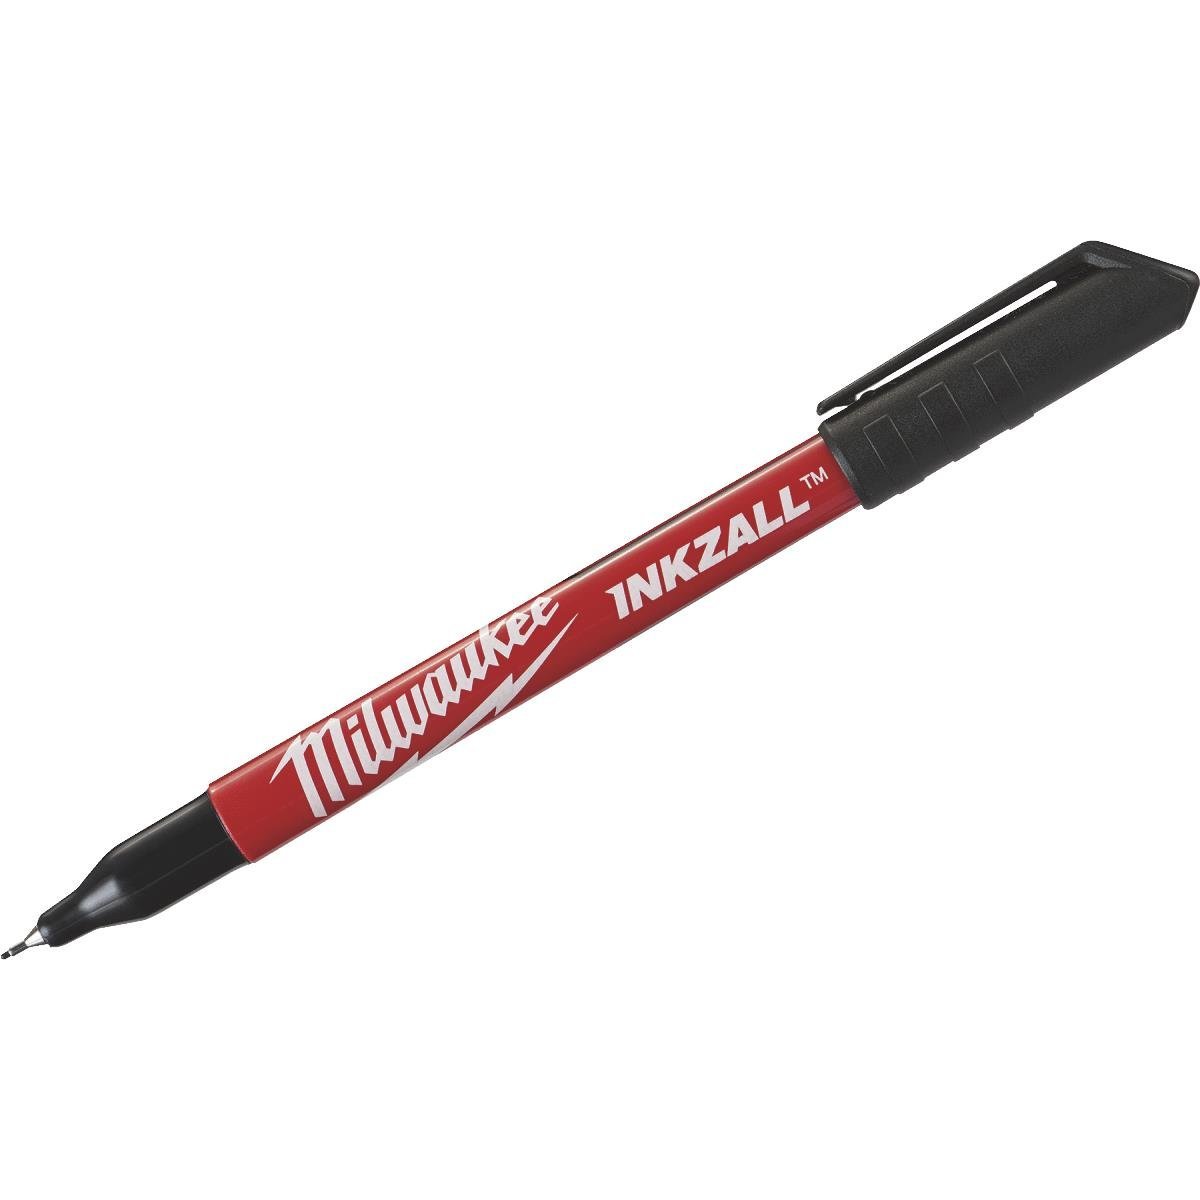 48-22-3164 045242479818 Milwaukee INKZALL™ ultra fine point pens are optimized for jobsite conditions and deliver sharp, precise lines. The durable ultra fine point tip delivers a 0.5 mm line for precise writing and labeling. Bleed resistant ink drys quickly and resists smears. 72 hour cap-off life delivers extended performance and use. An integrated pocket clip enables easy carry and storage.